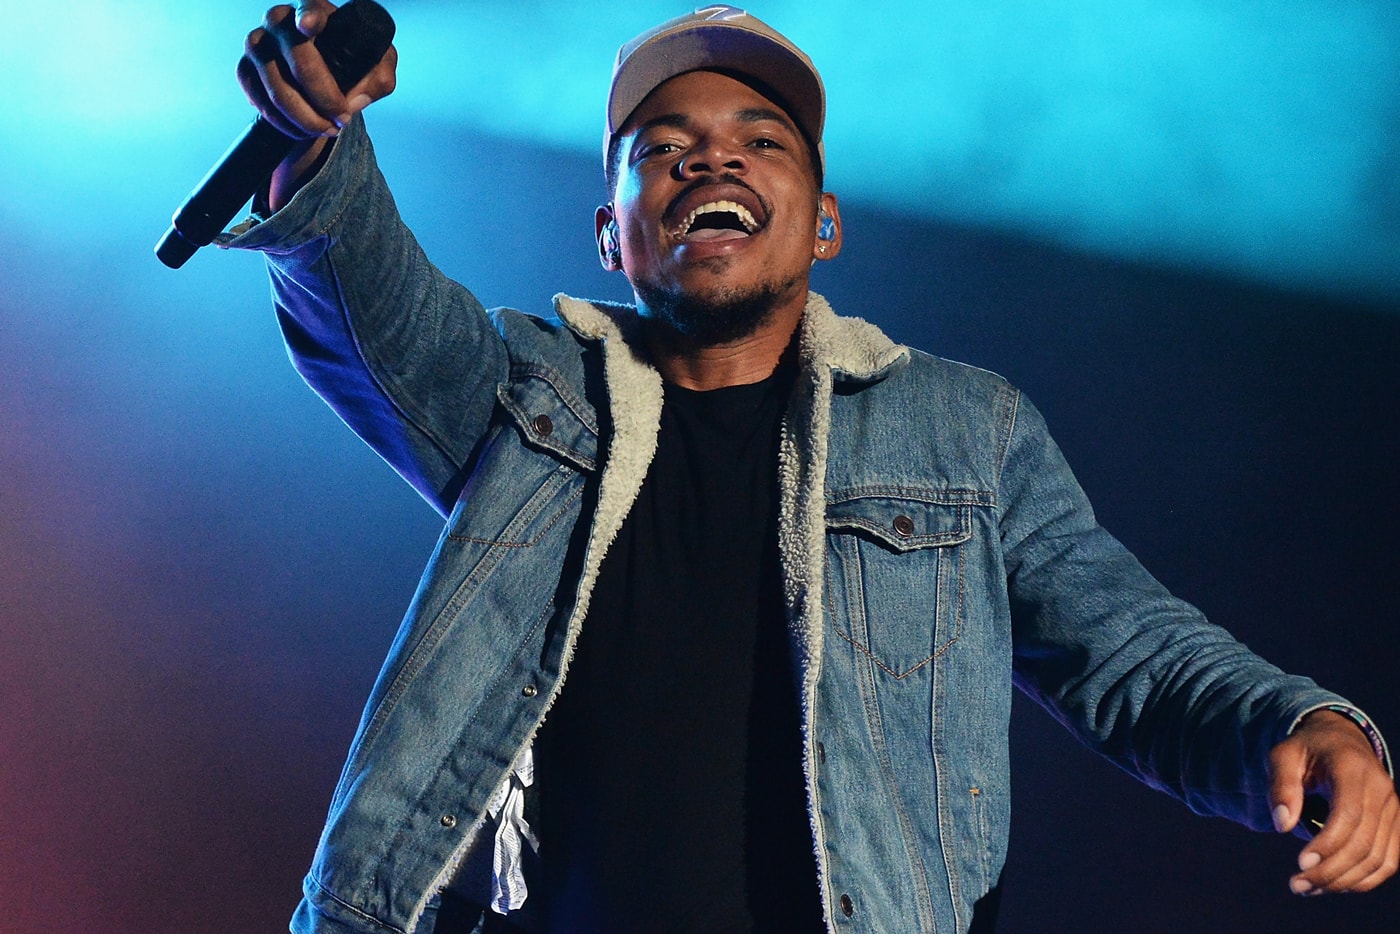 Chance The Rapper Sterling Hayes Drowsiness single stream may 8 2018 release date info drop debut premiere soundcloud